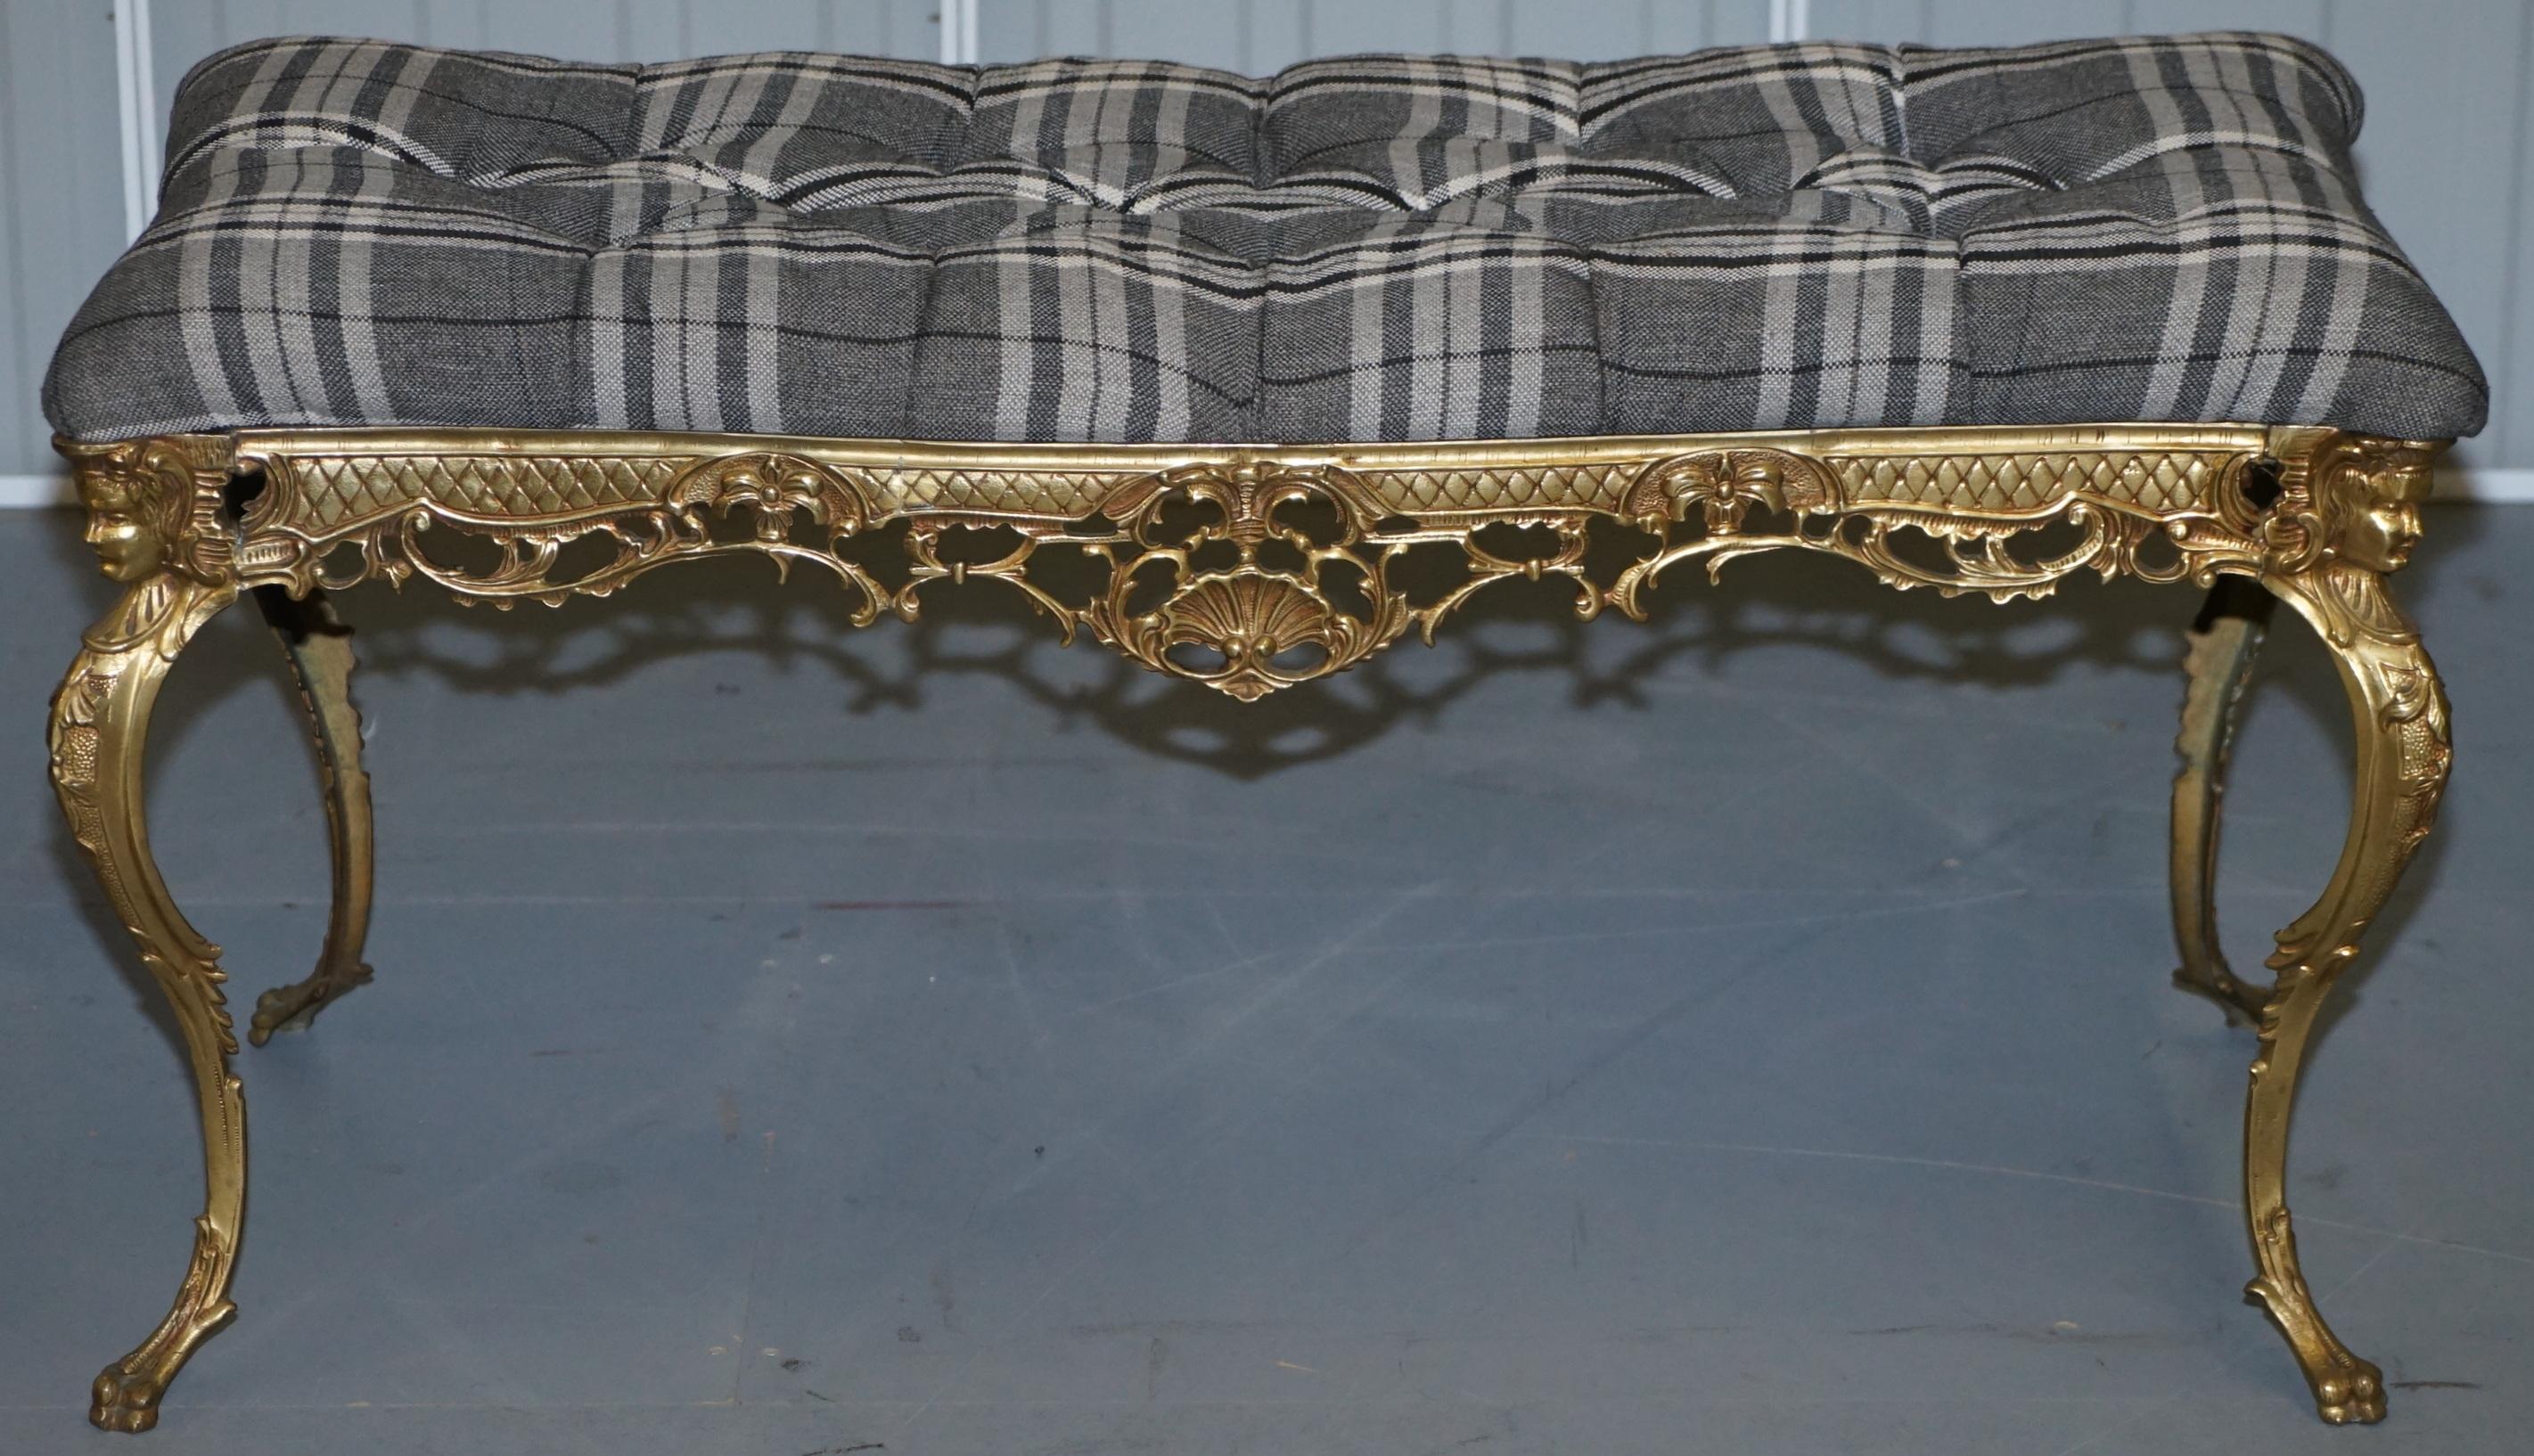 We are delighted to offer for sale this lovely original circa 1920s French gold gilt brass bench stool with new chesterfield tufted tartan upholstery

A very ornately cast traditional French neoclassical revival bench. Stamped on the inside of the